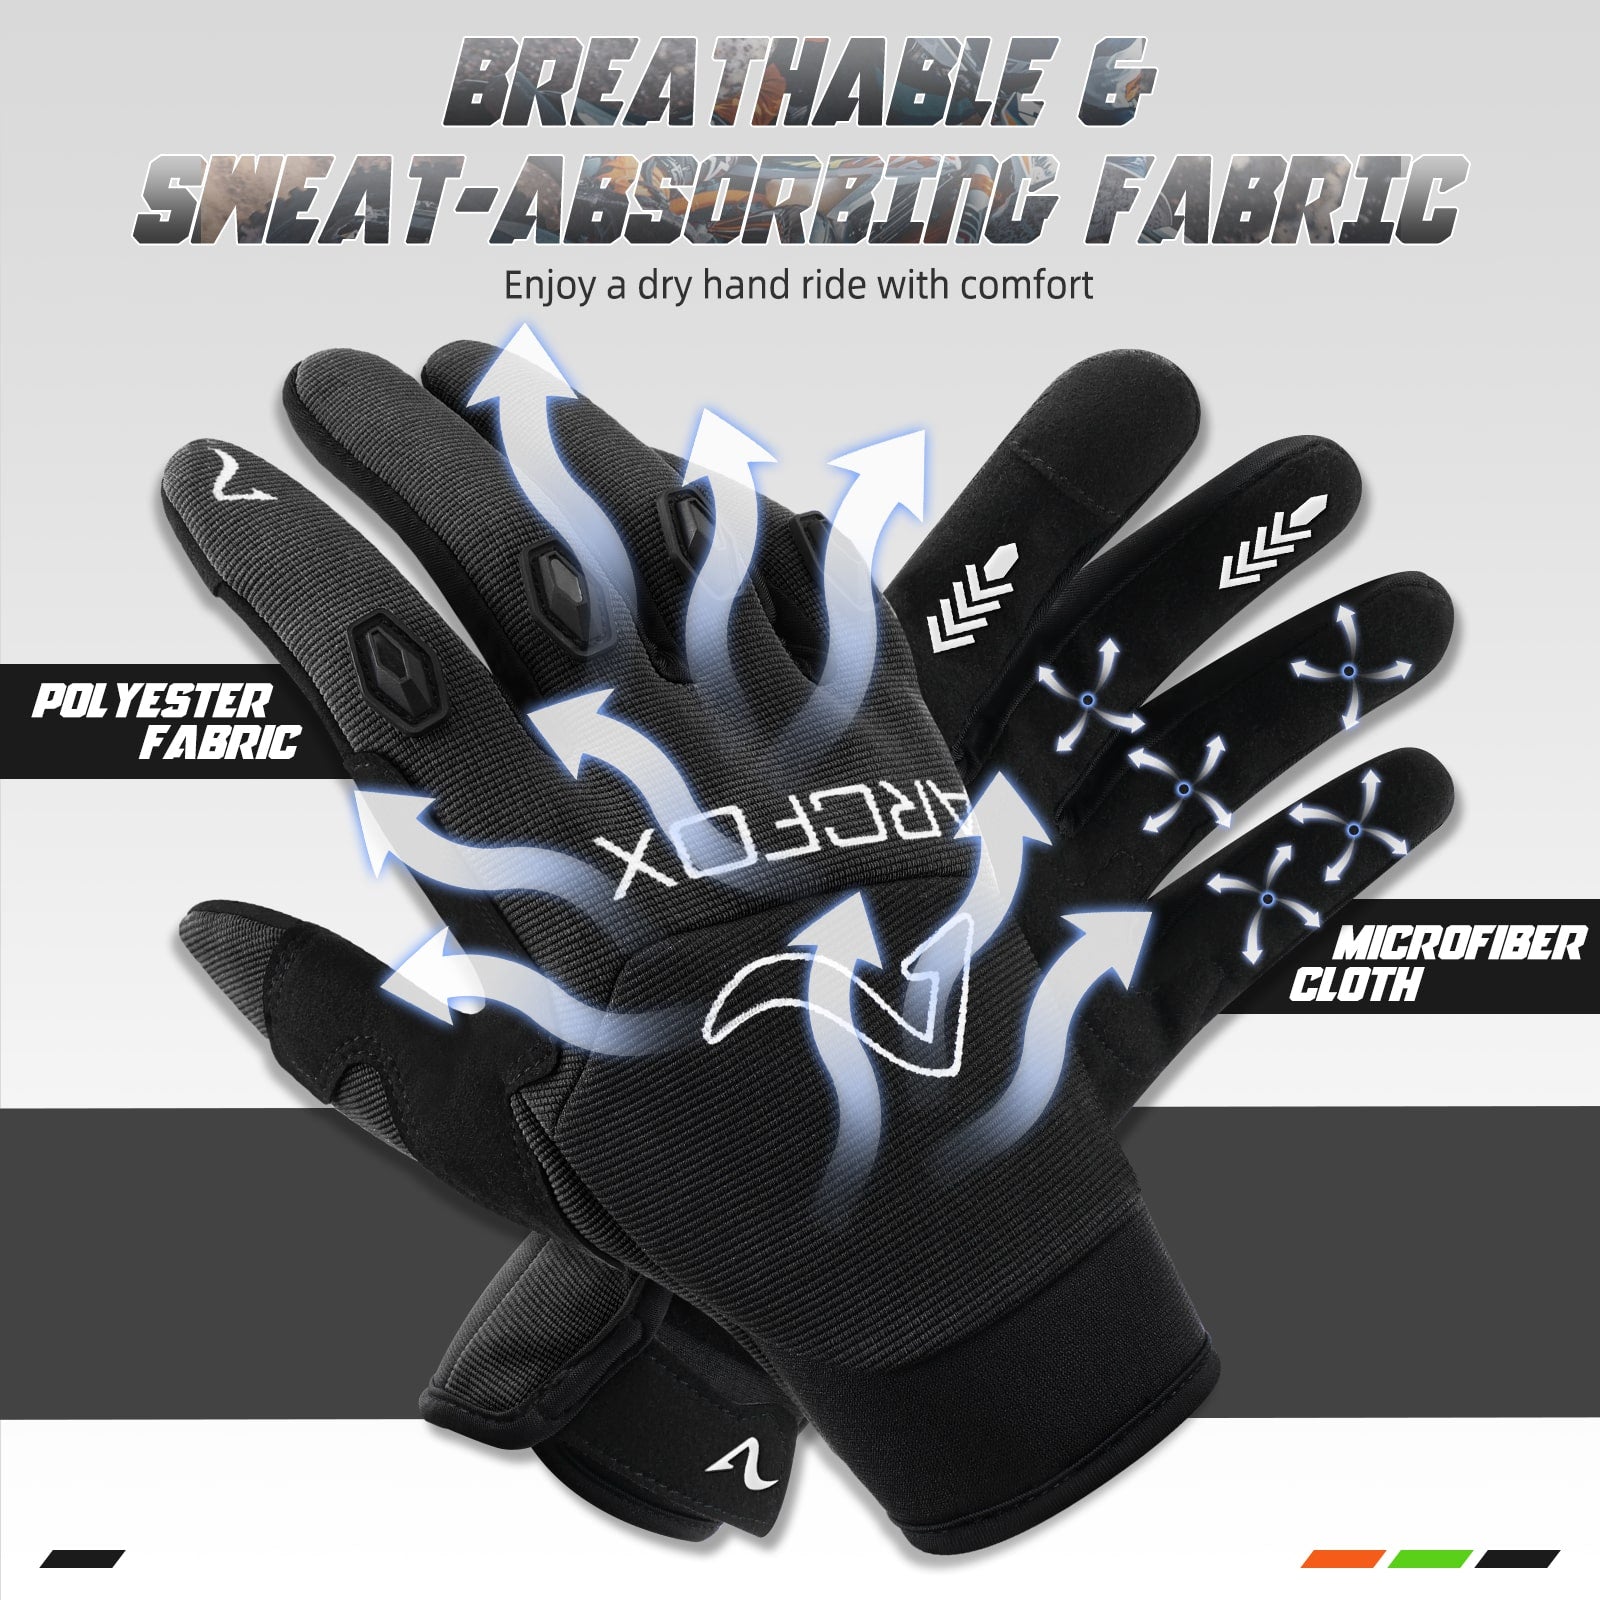 ARCFOX Dirt Bike Gloves for ATV UTV MTB Motocross Motorcycle Off-Road Riding Touch Screen Breathable Sweat-absorbing Fabric